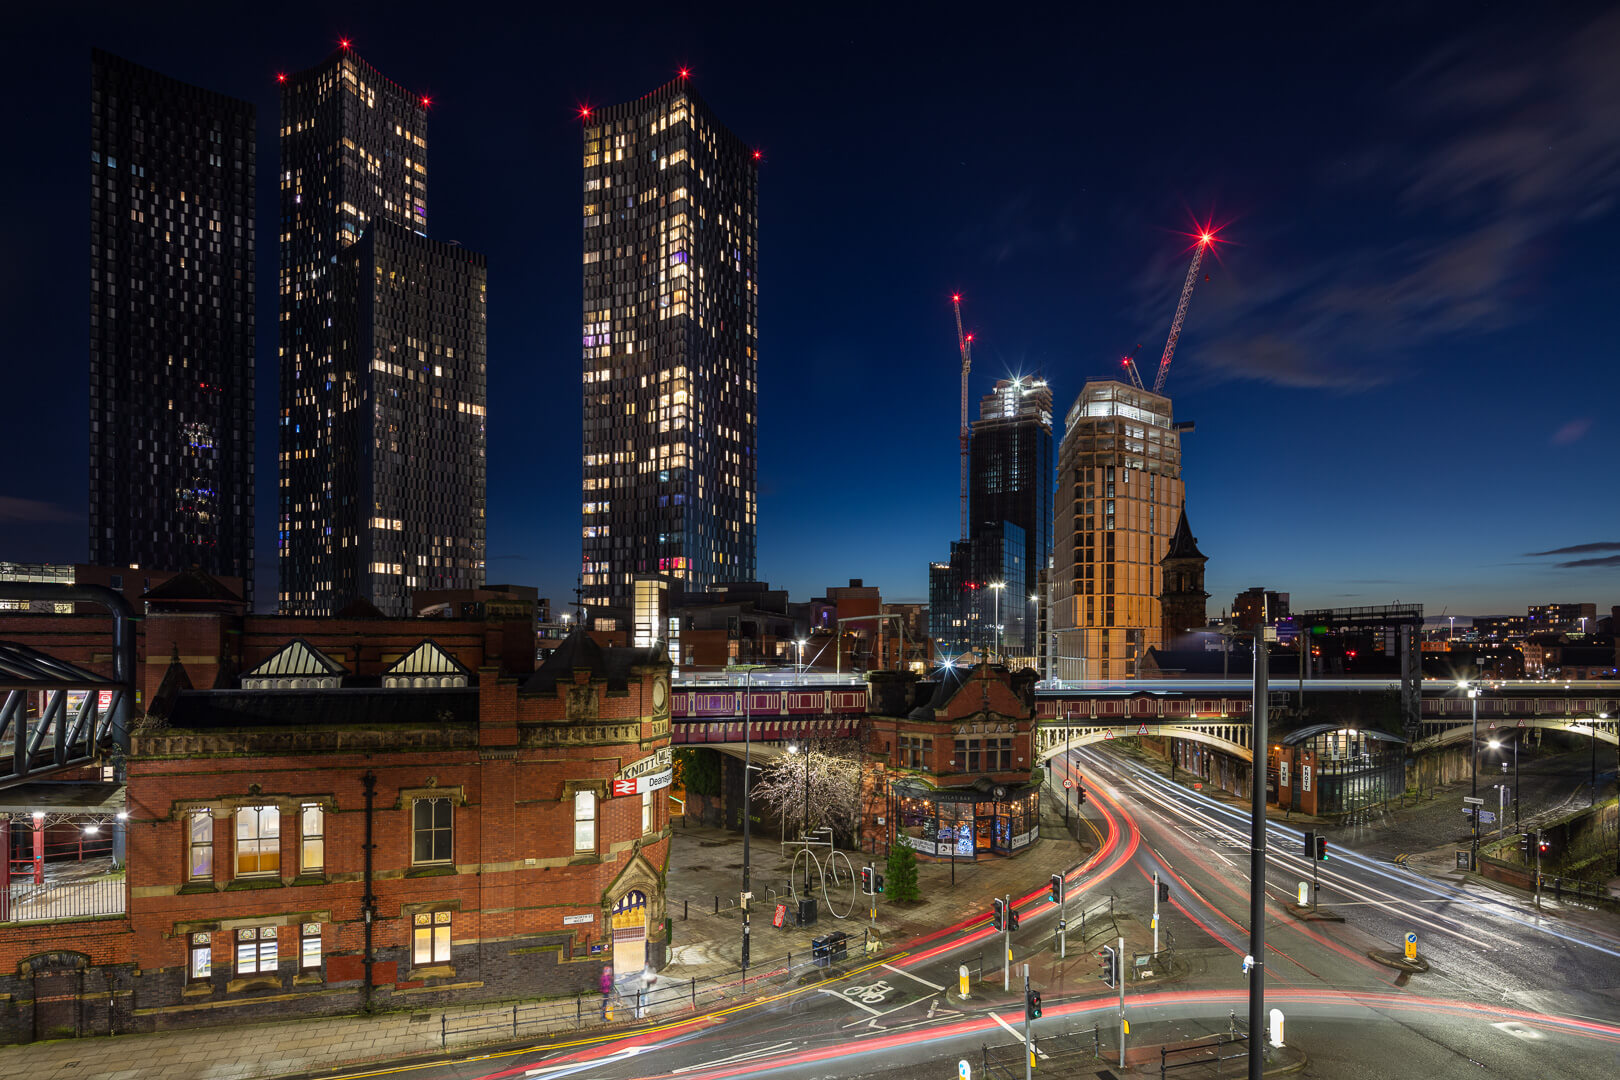 Architectural photography - Deansgate Square & Castle Wharf residential developments, Manchester